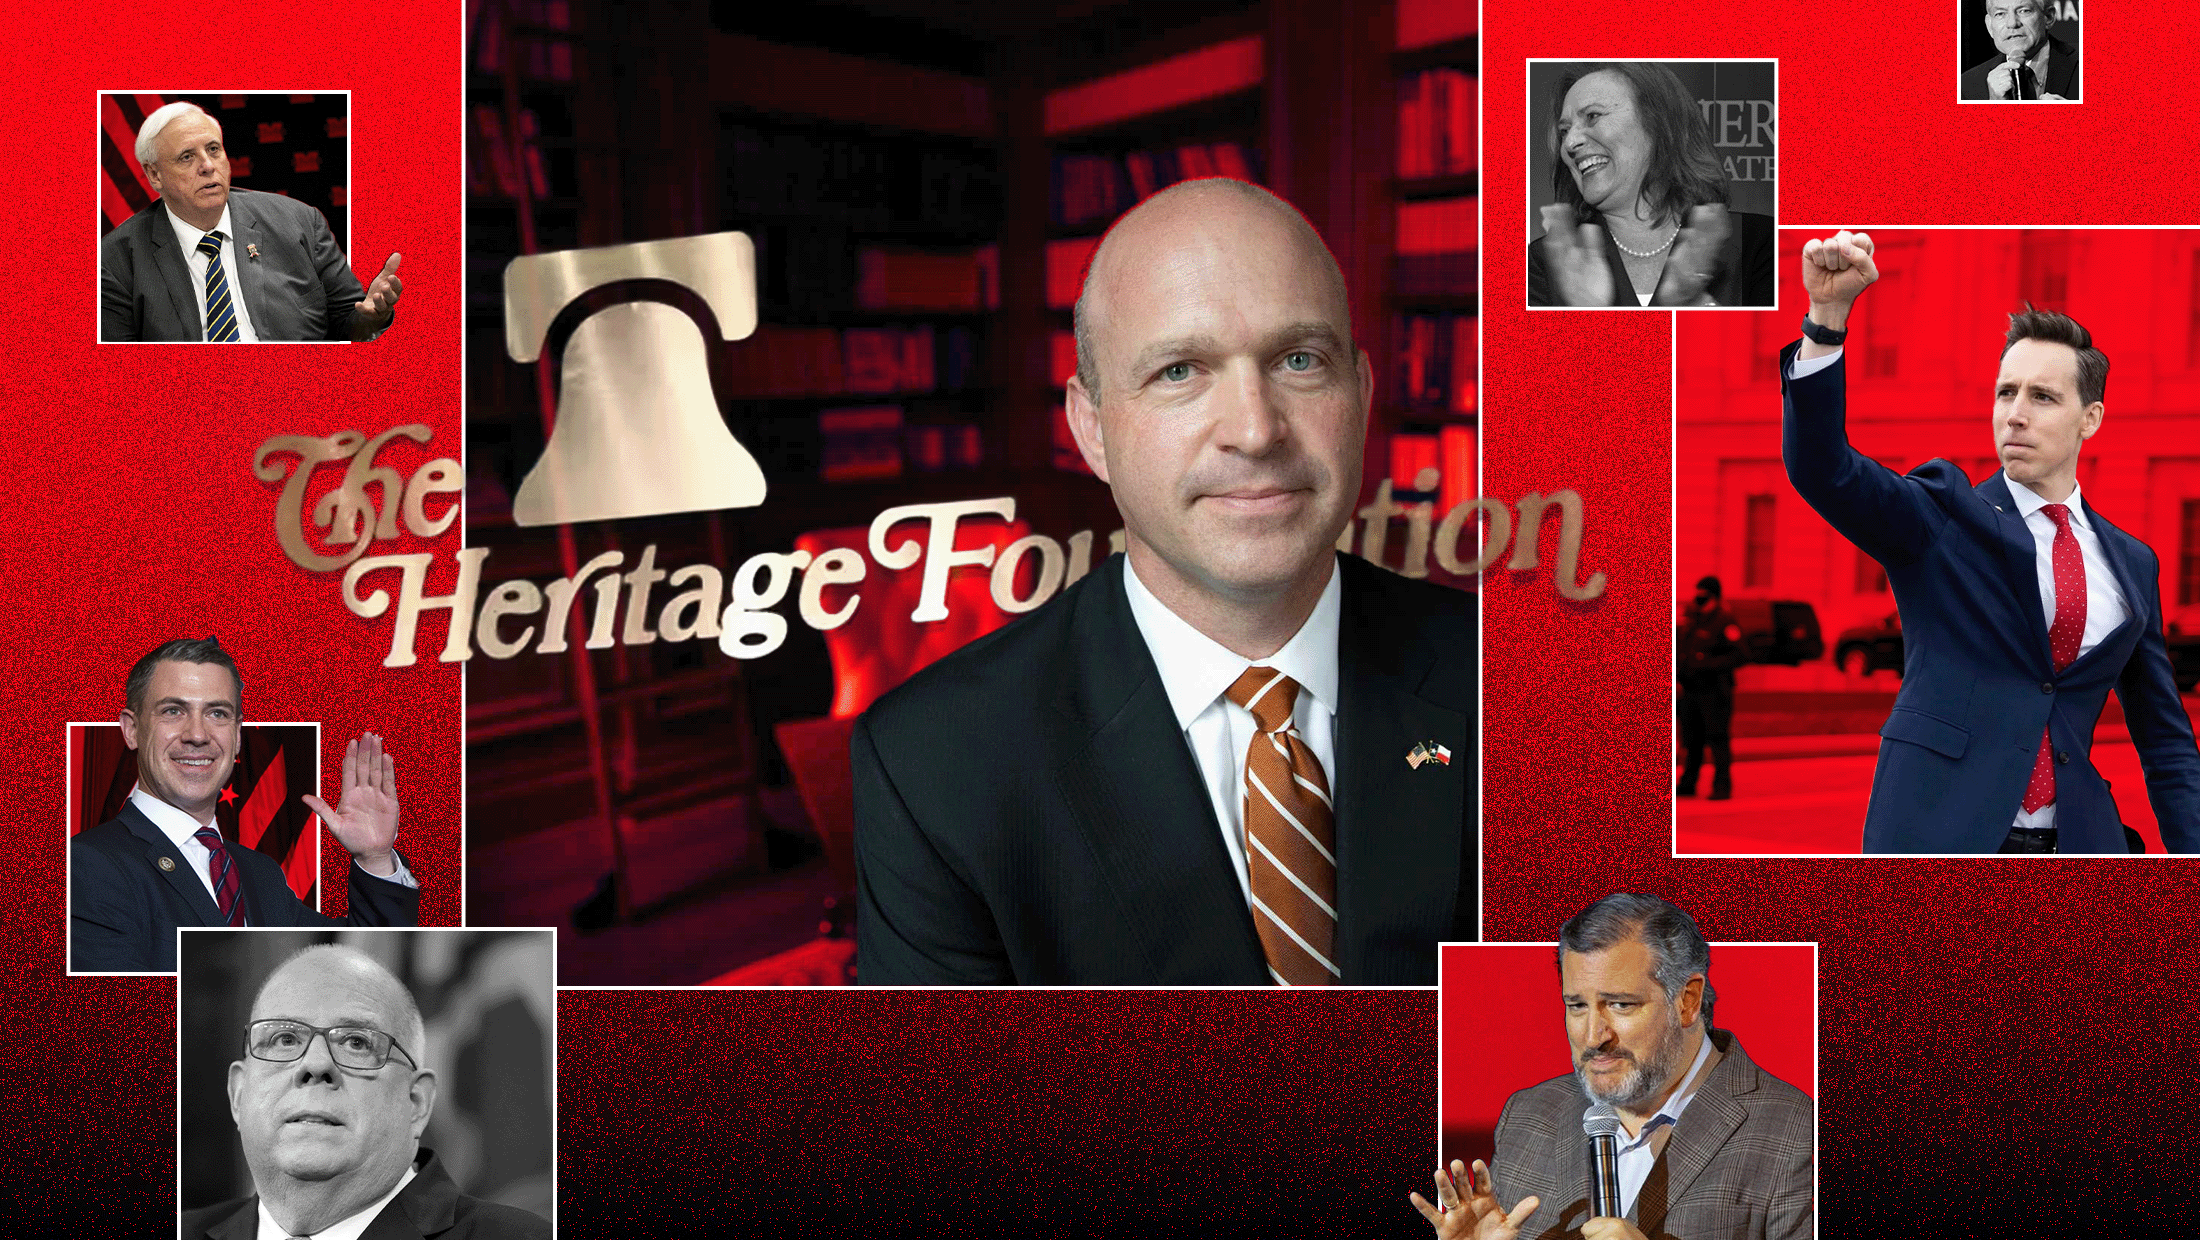 A photo of Kevin Roberts in front of The Heritage Foundation logo set against a red backdrop, with squares featuring images of Jim Justice, Jim Banks, Larry Hogan, Deb Fischer, Josh Hawley, Ted Cruz and David Schweikert.